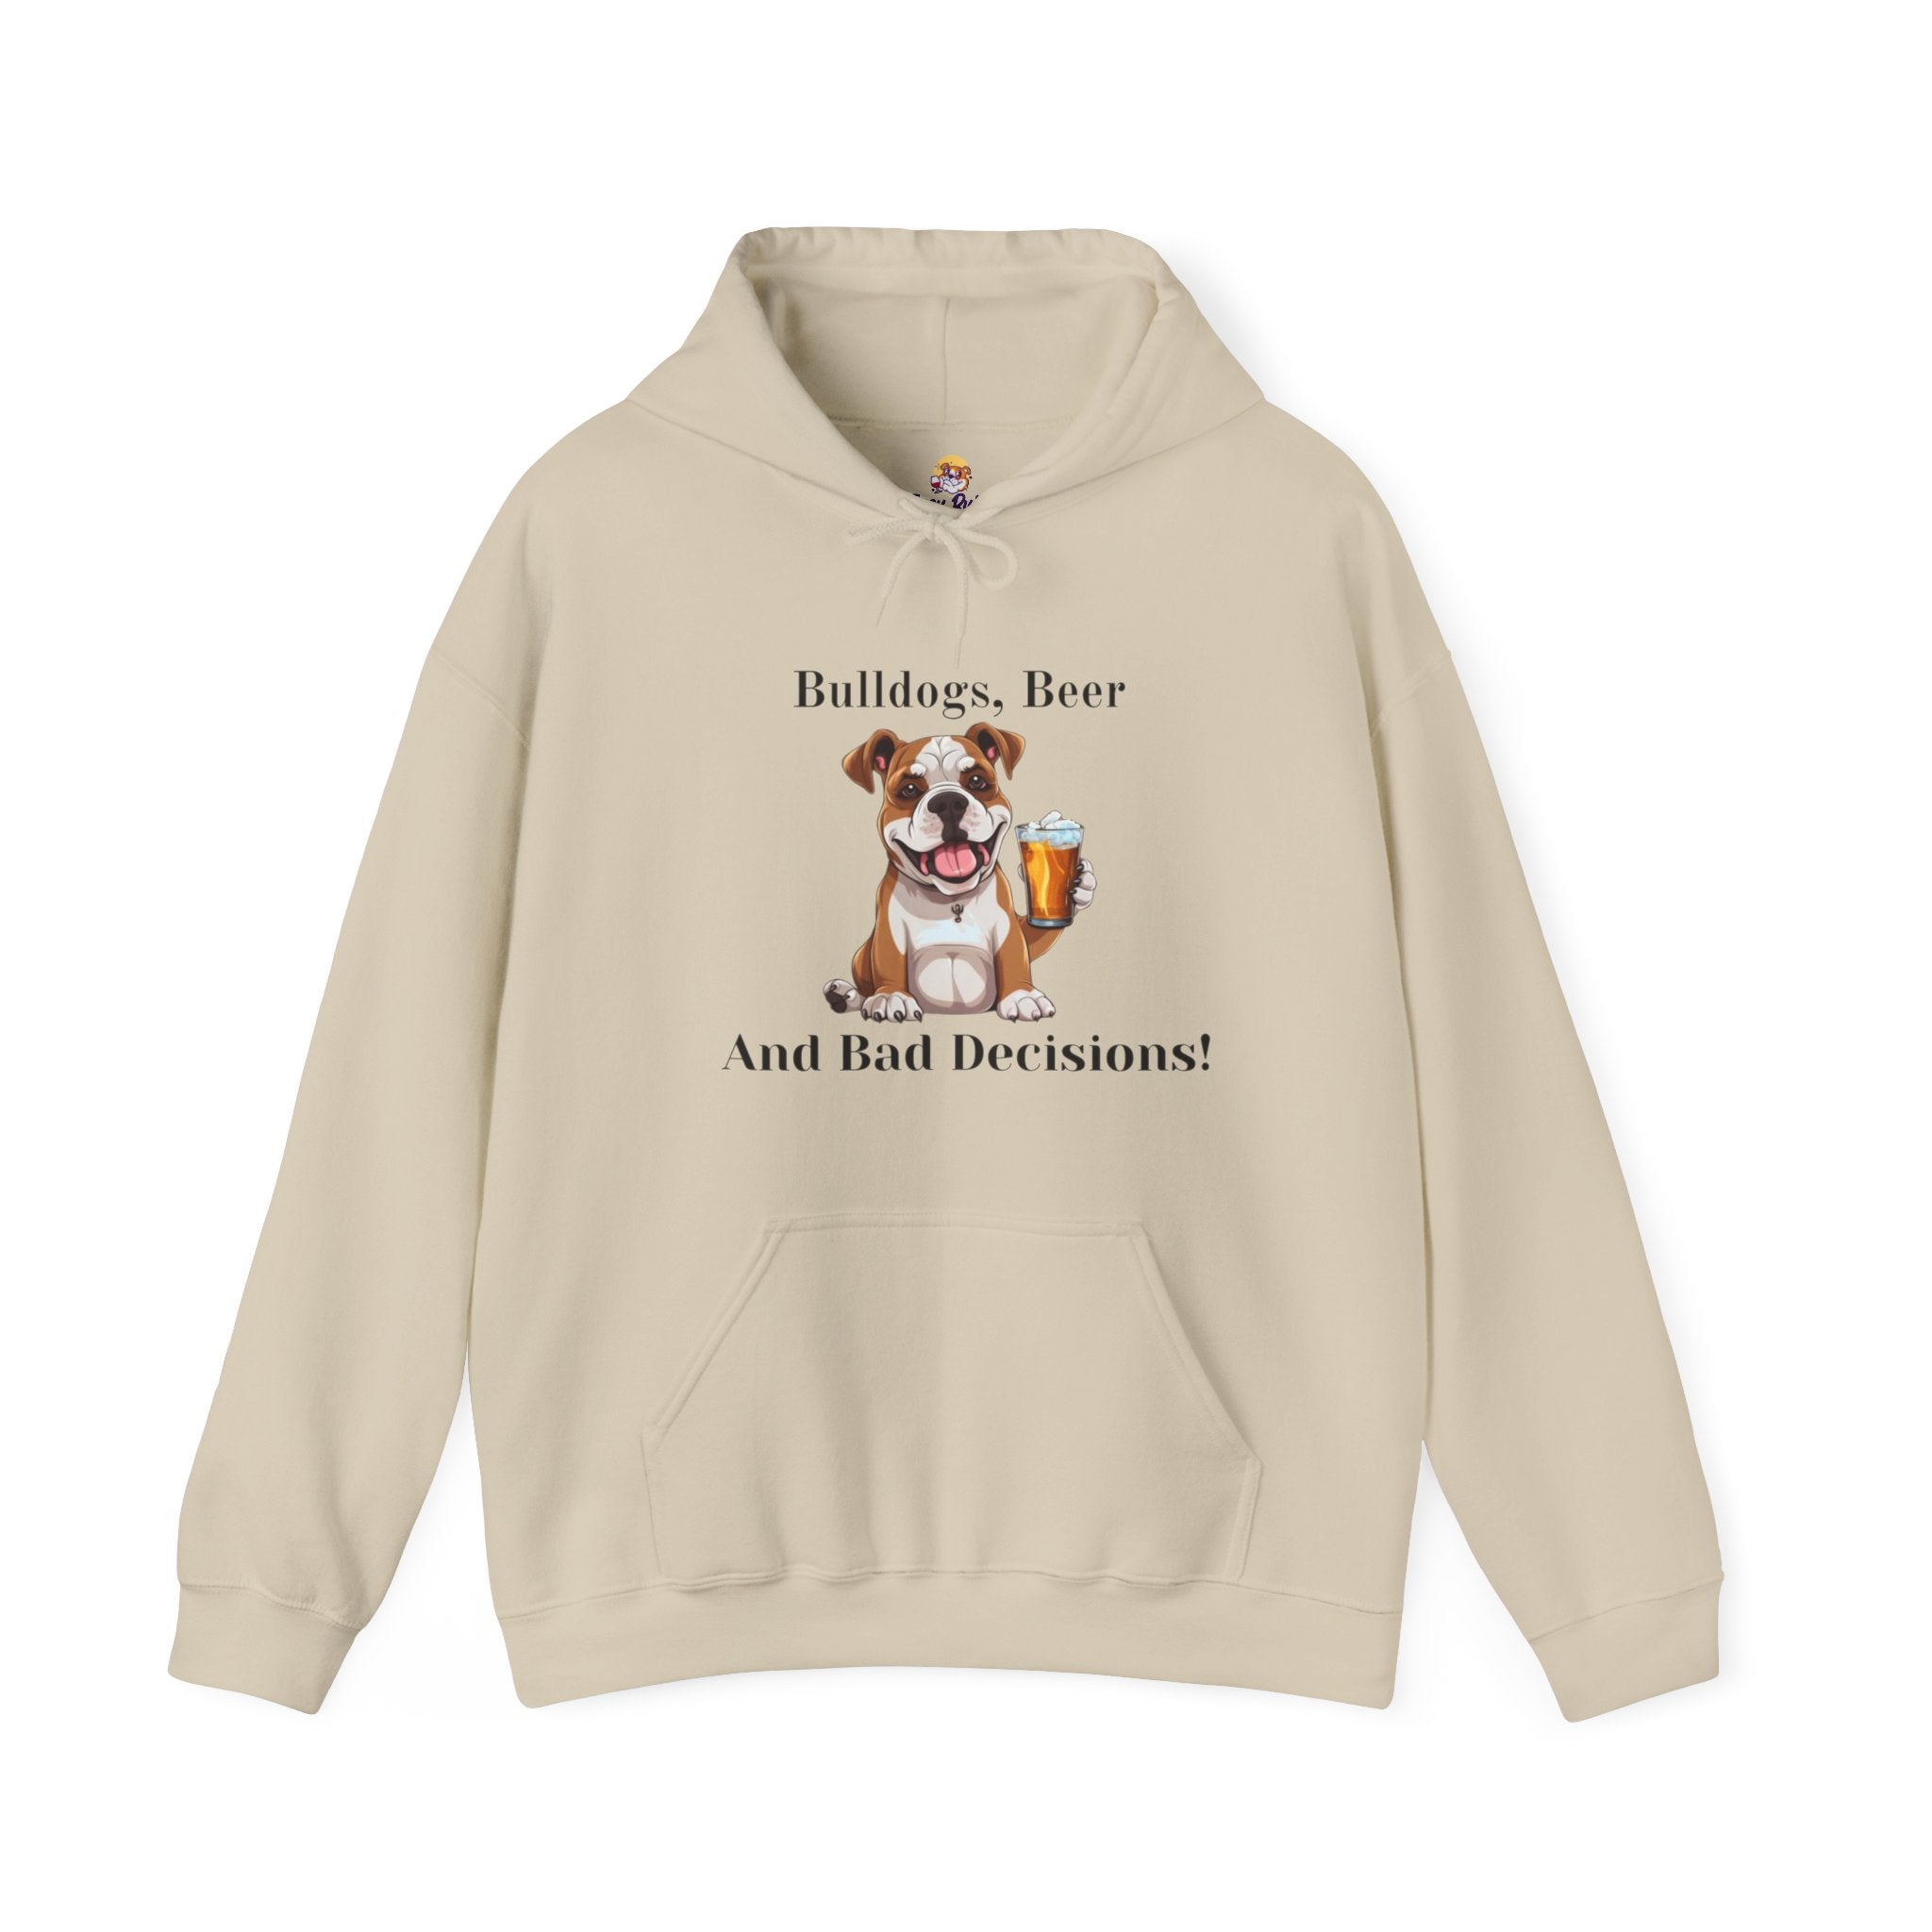 Bulldogs, Beer, and Bad Decisions" Hoodie - Your Go-To Gear for Mischievous Times! (American/White)